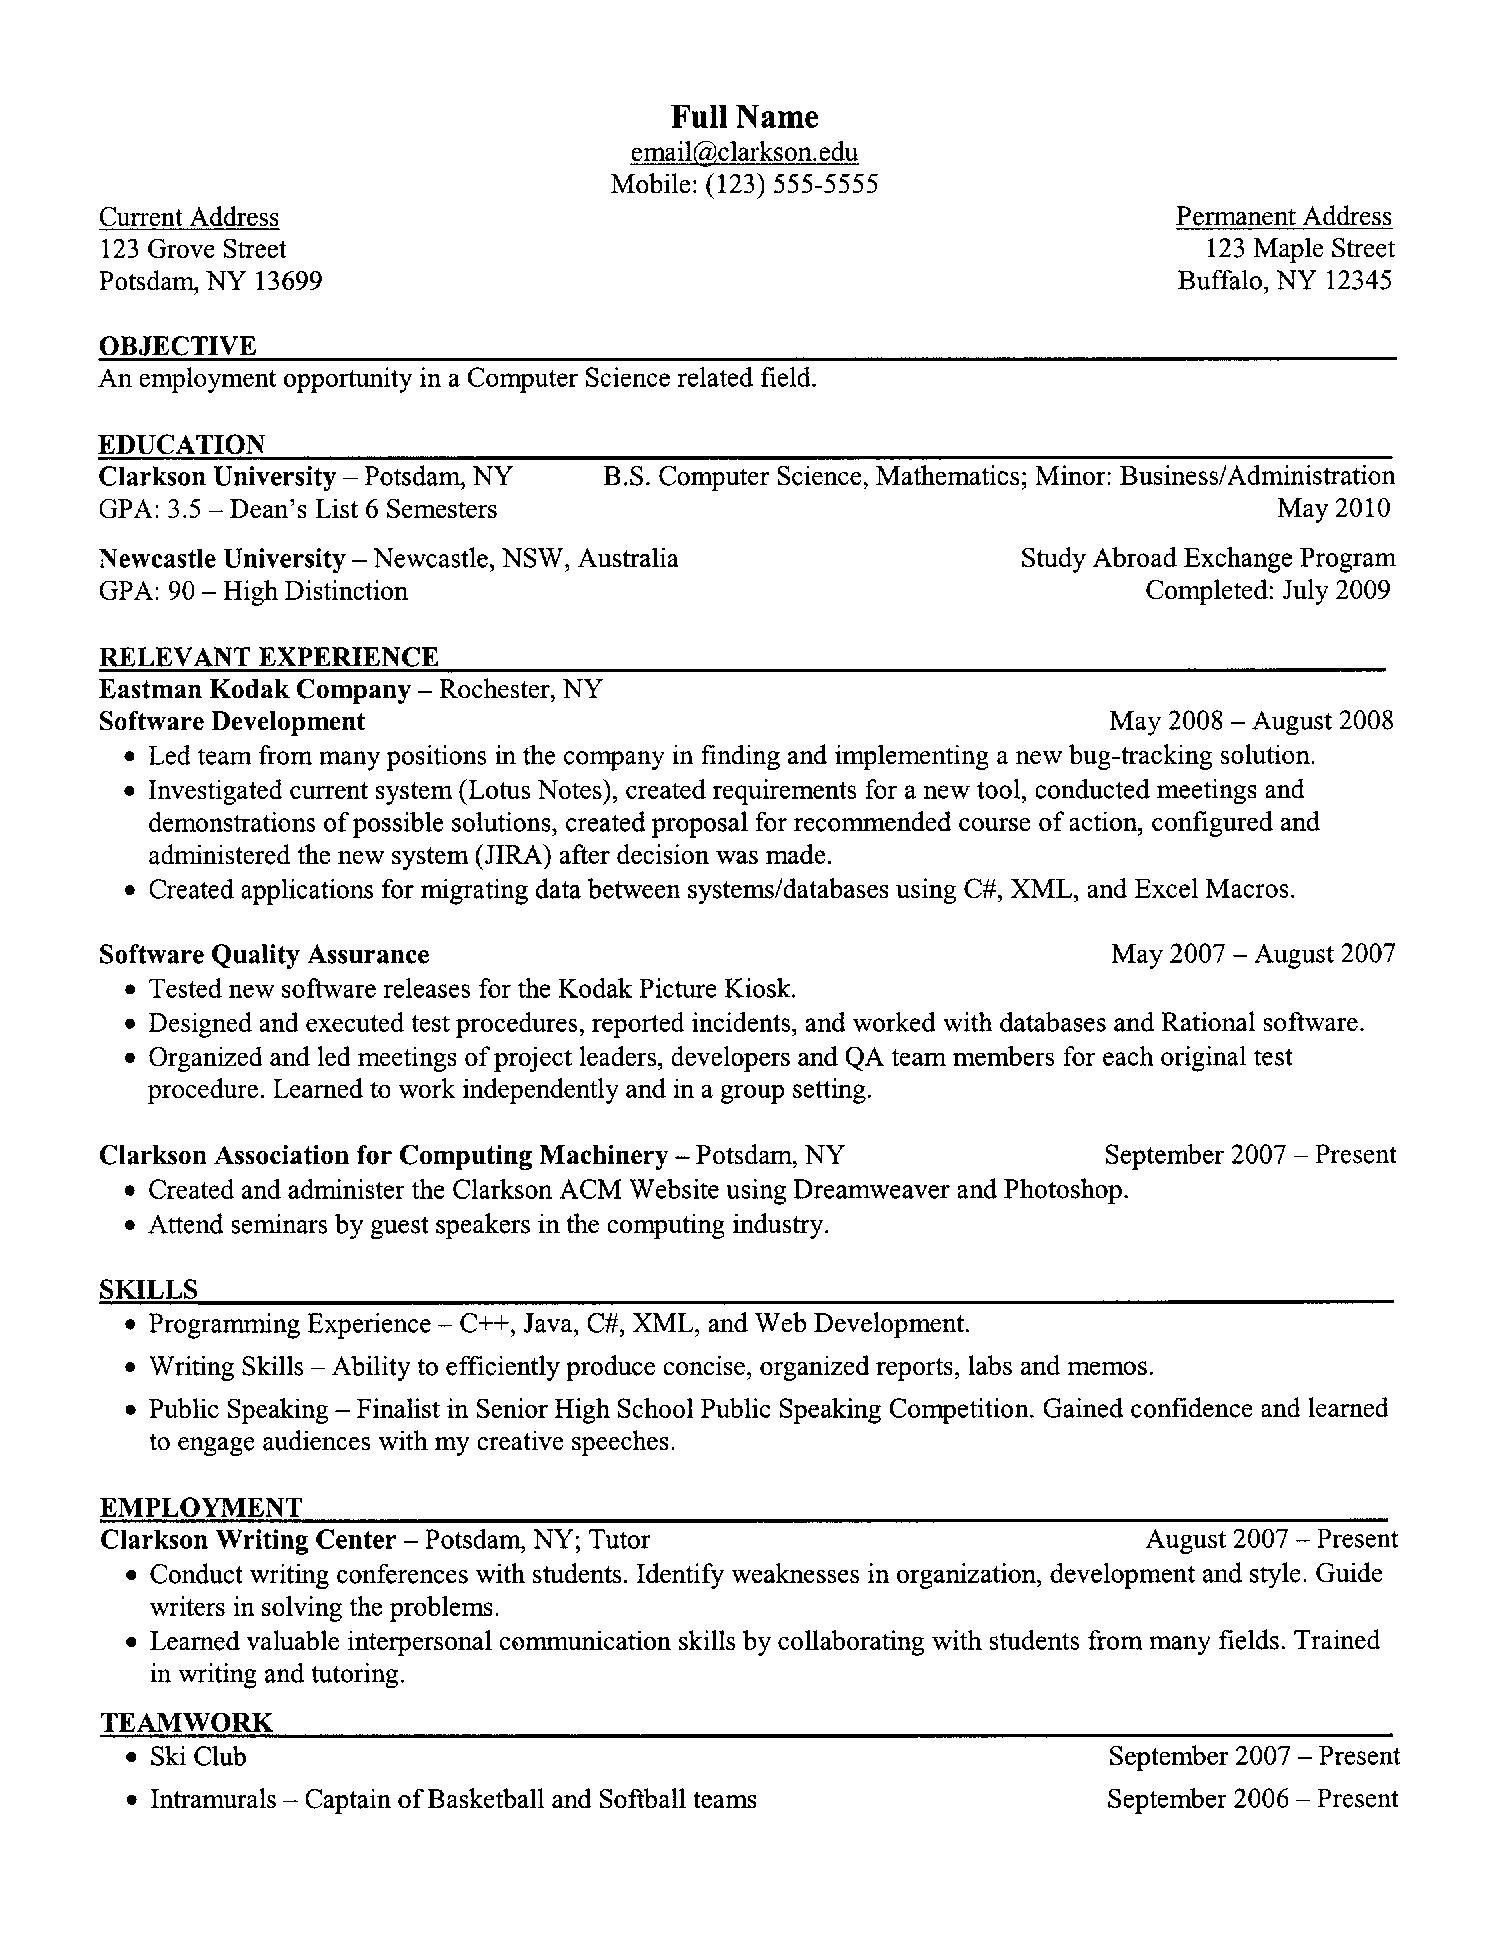 objective statement in resume examples